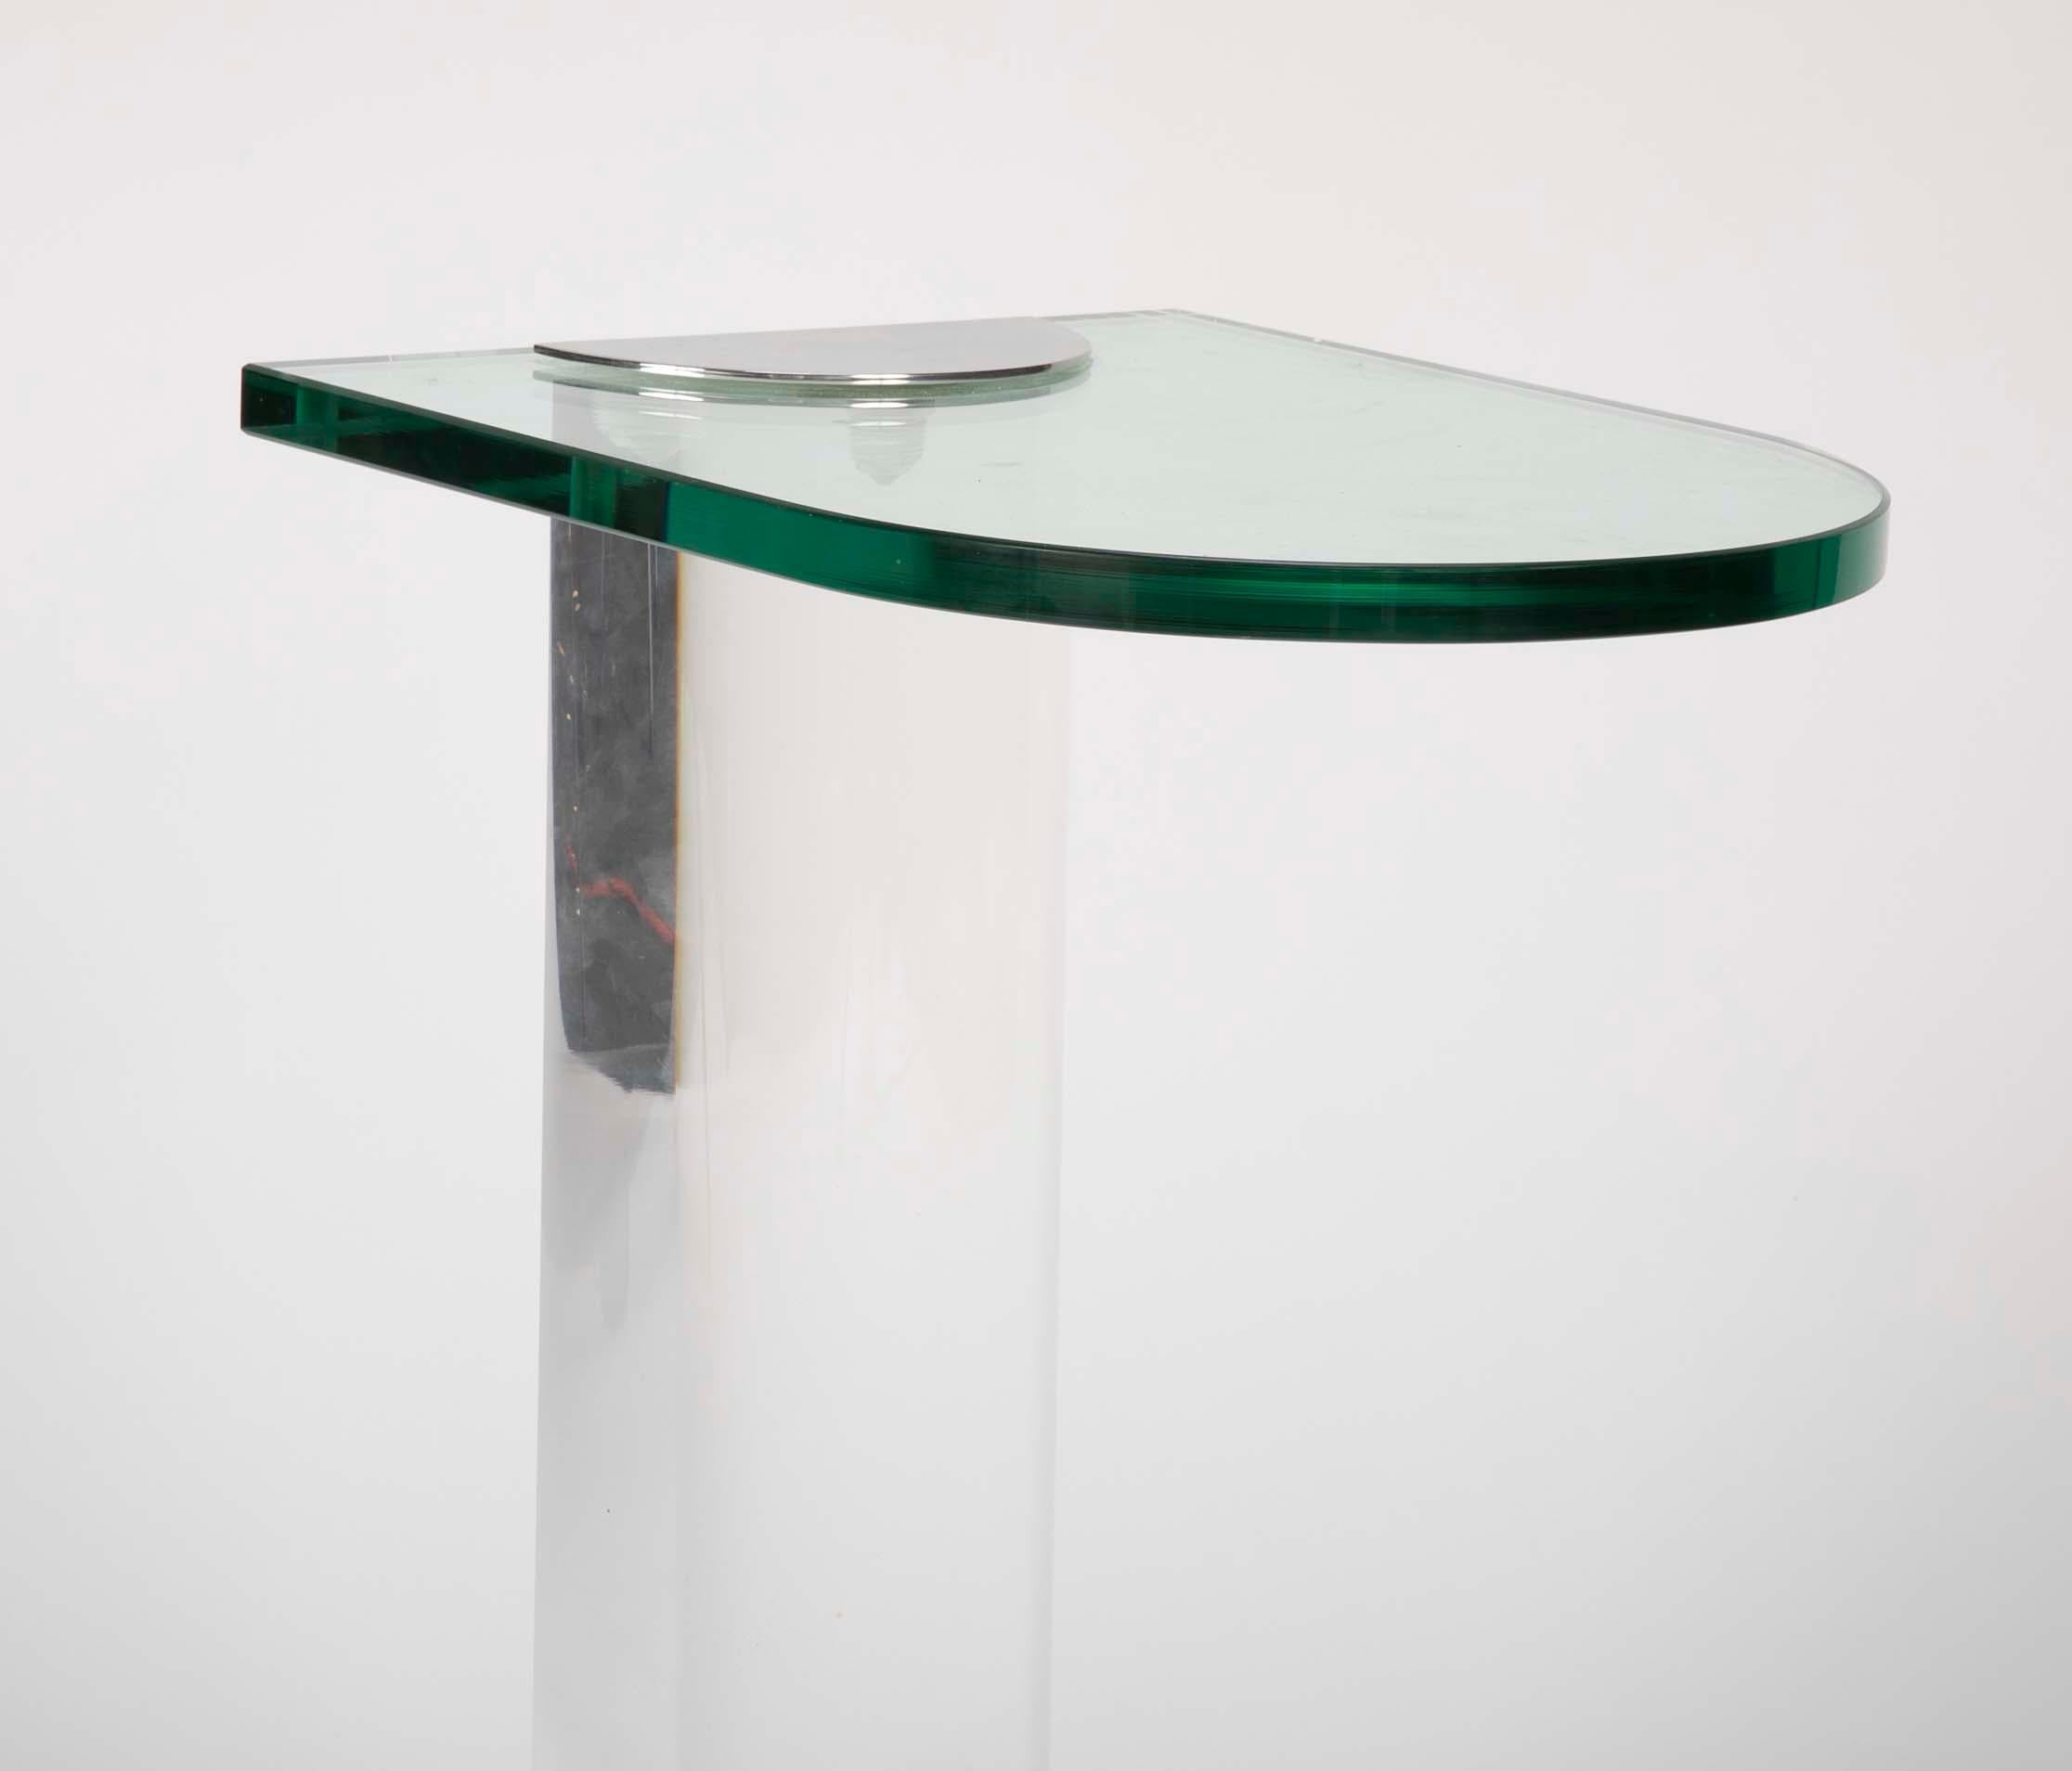 American Glass, Lucite and Chrome Side Table Attributed to Lorin Marsh